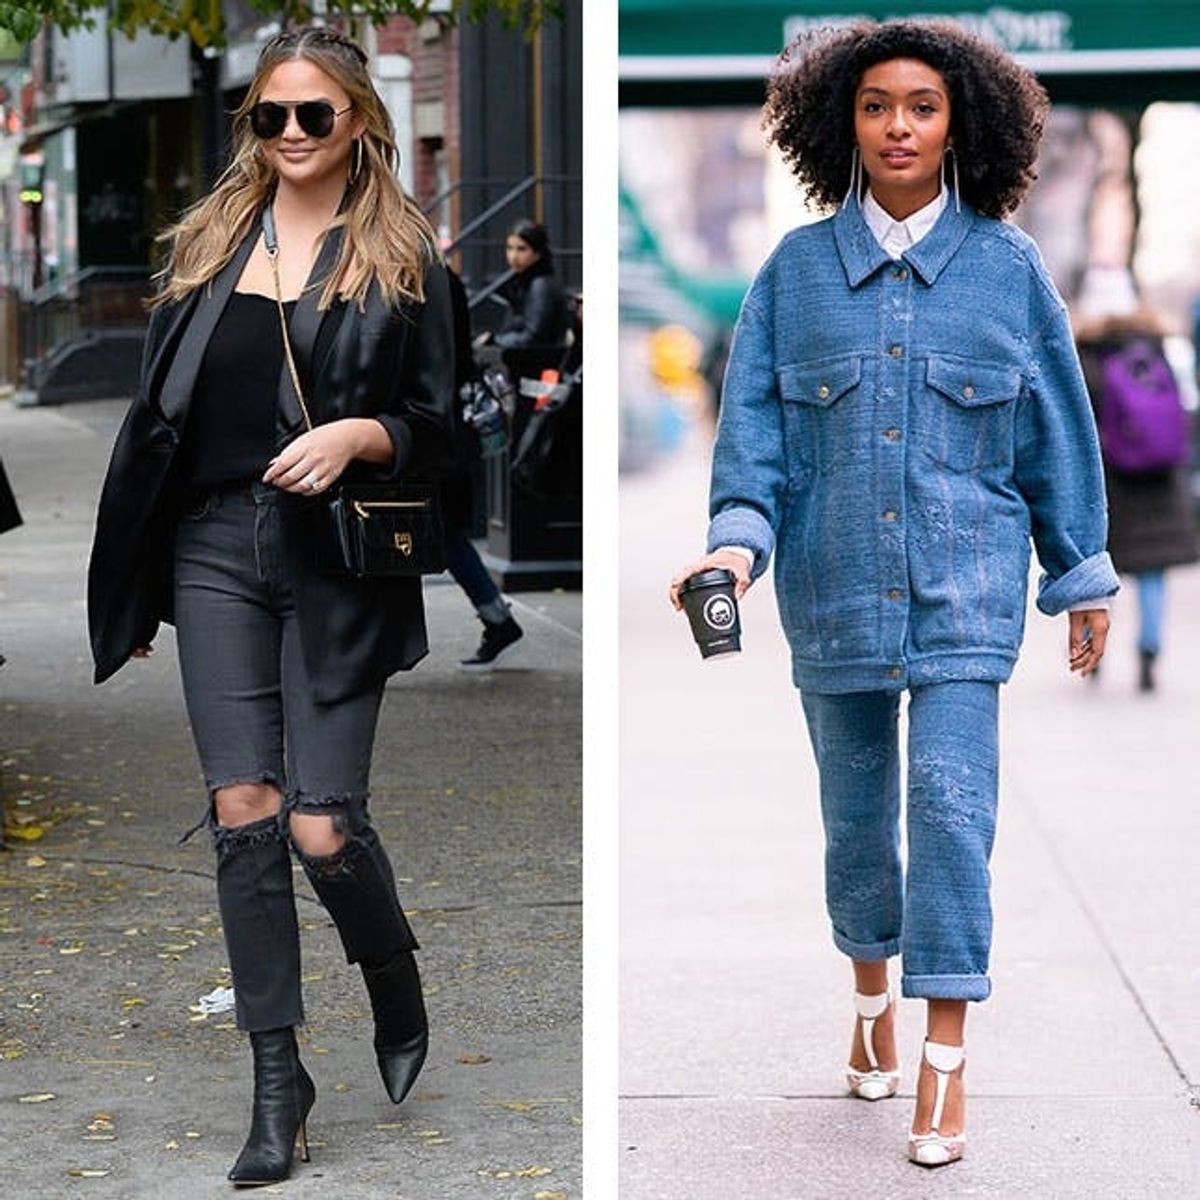 9 Creative Ways to Wear Jeans This Spring, According to Celebs